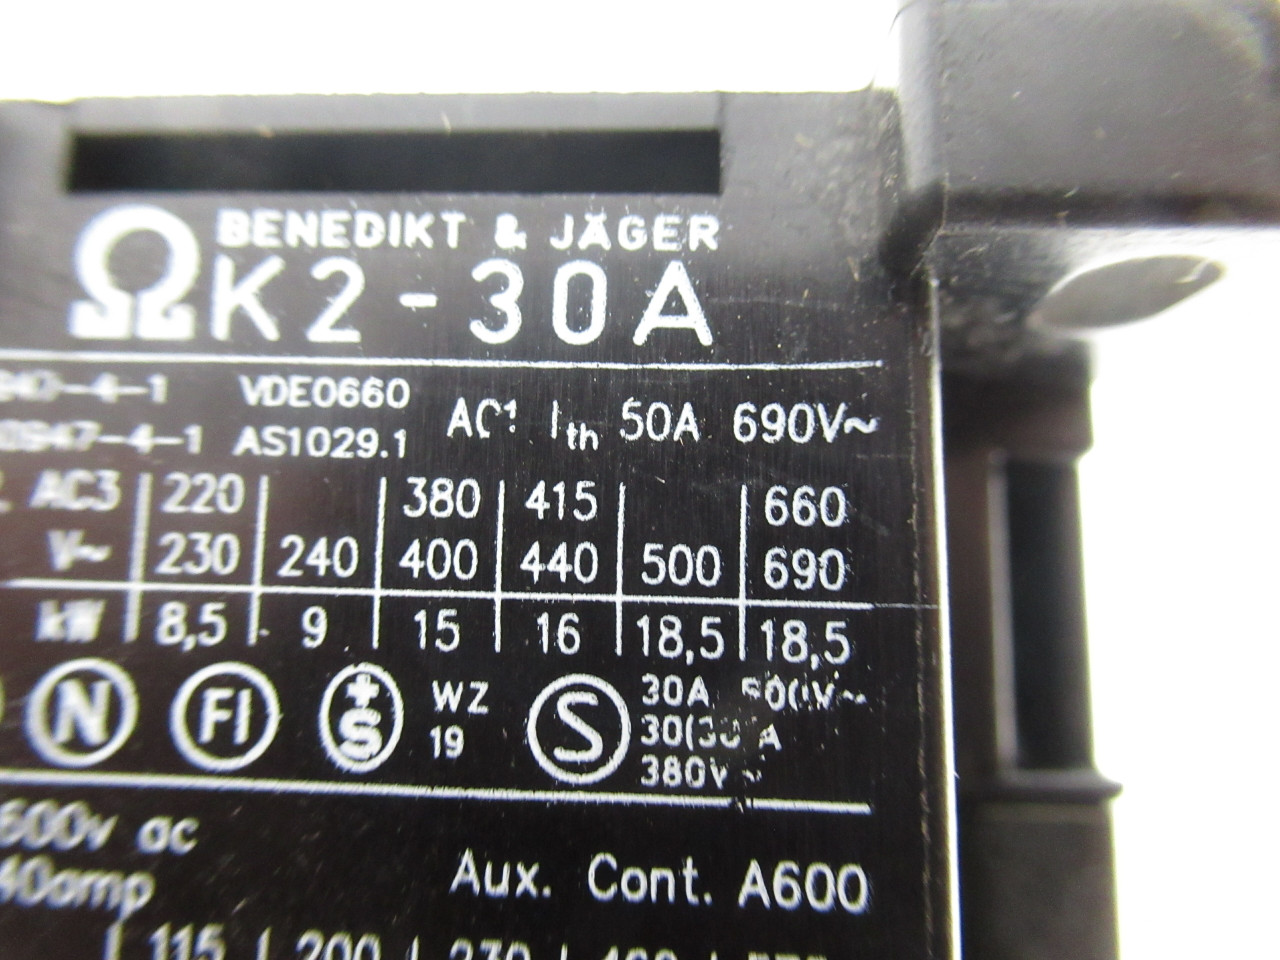 Benedikt & Jager K2-30A01 Contactor 690V 50A 3P USED